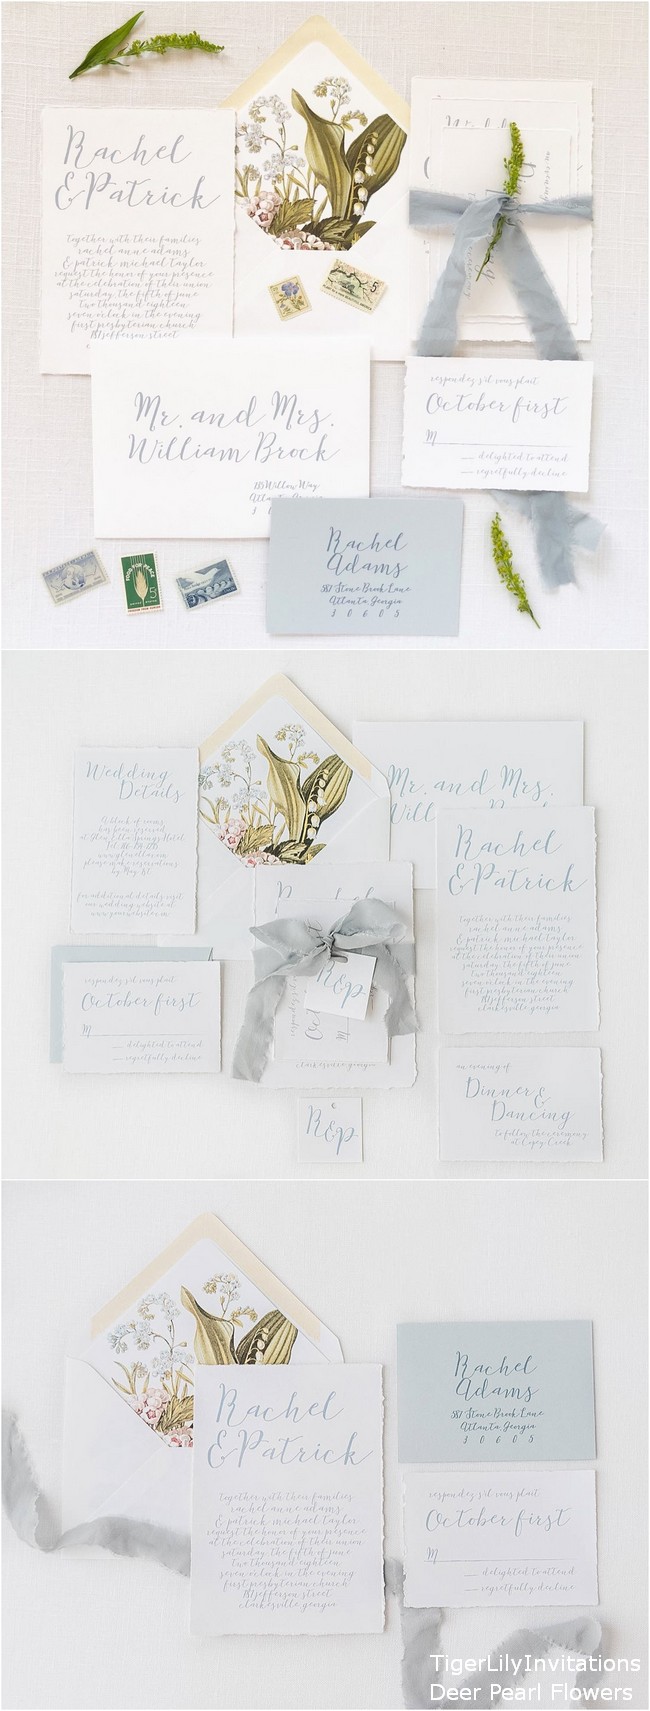 Dusty Blue Wedding Invitations printed on Cotton Cardstock with Hand Torn Edge and Botanical Envelope Liners